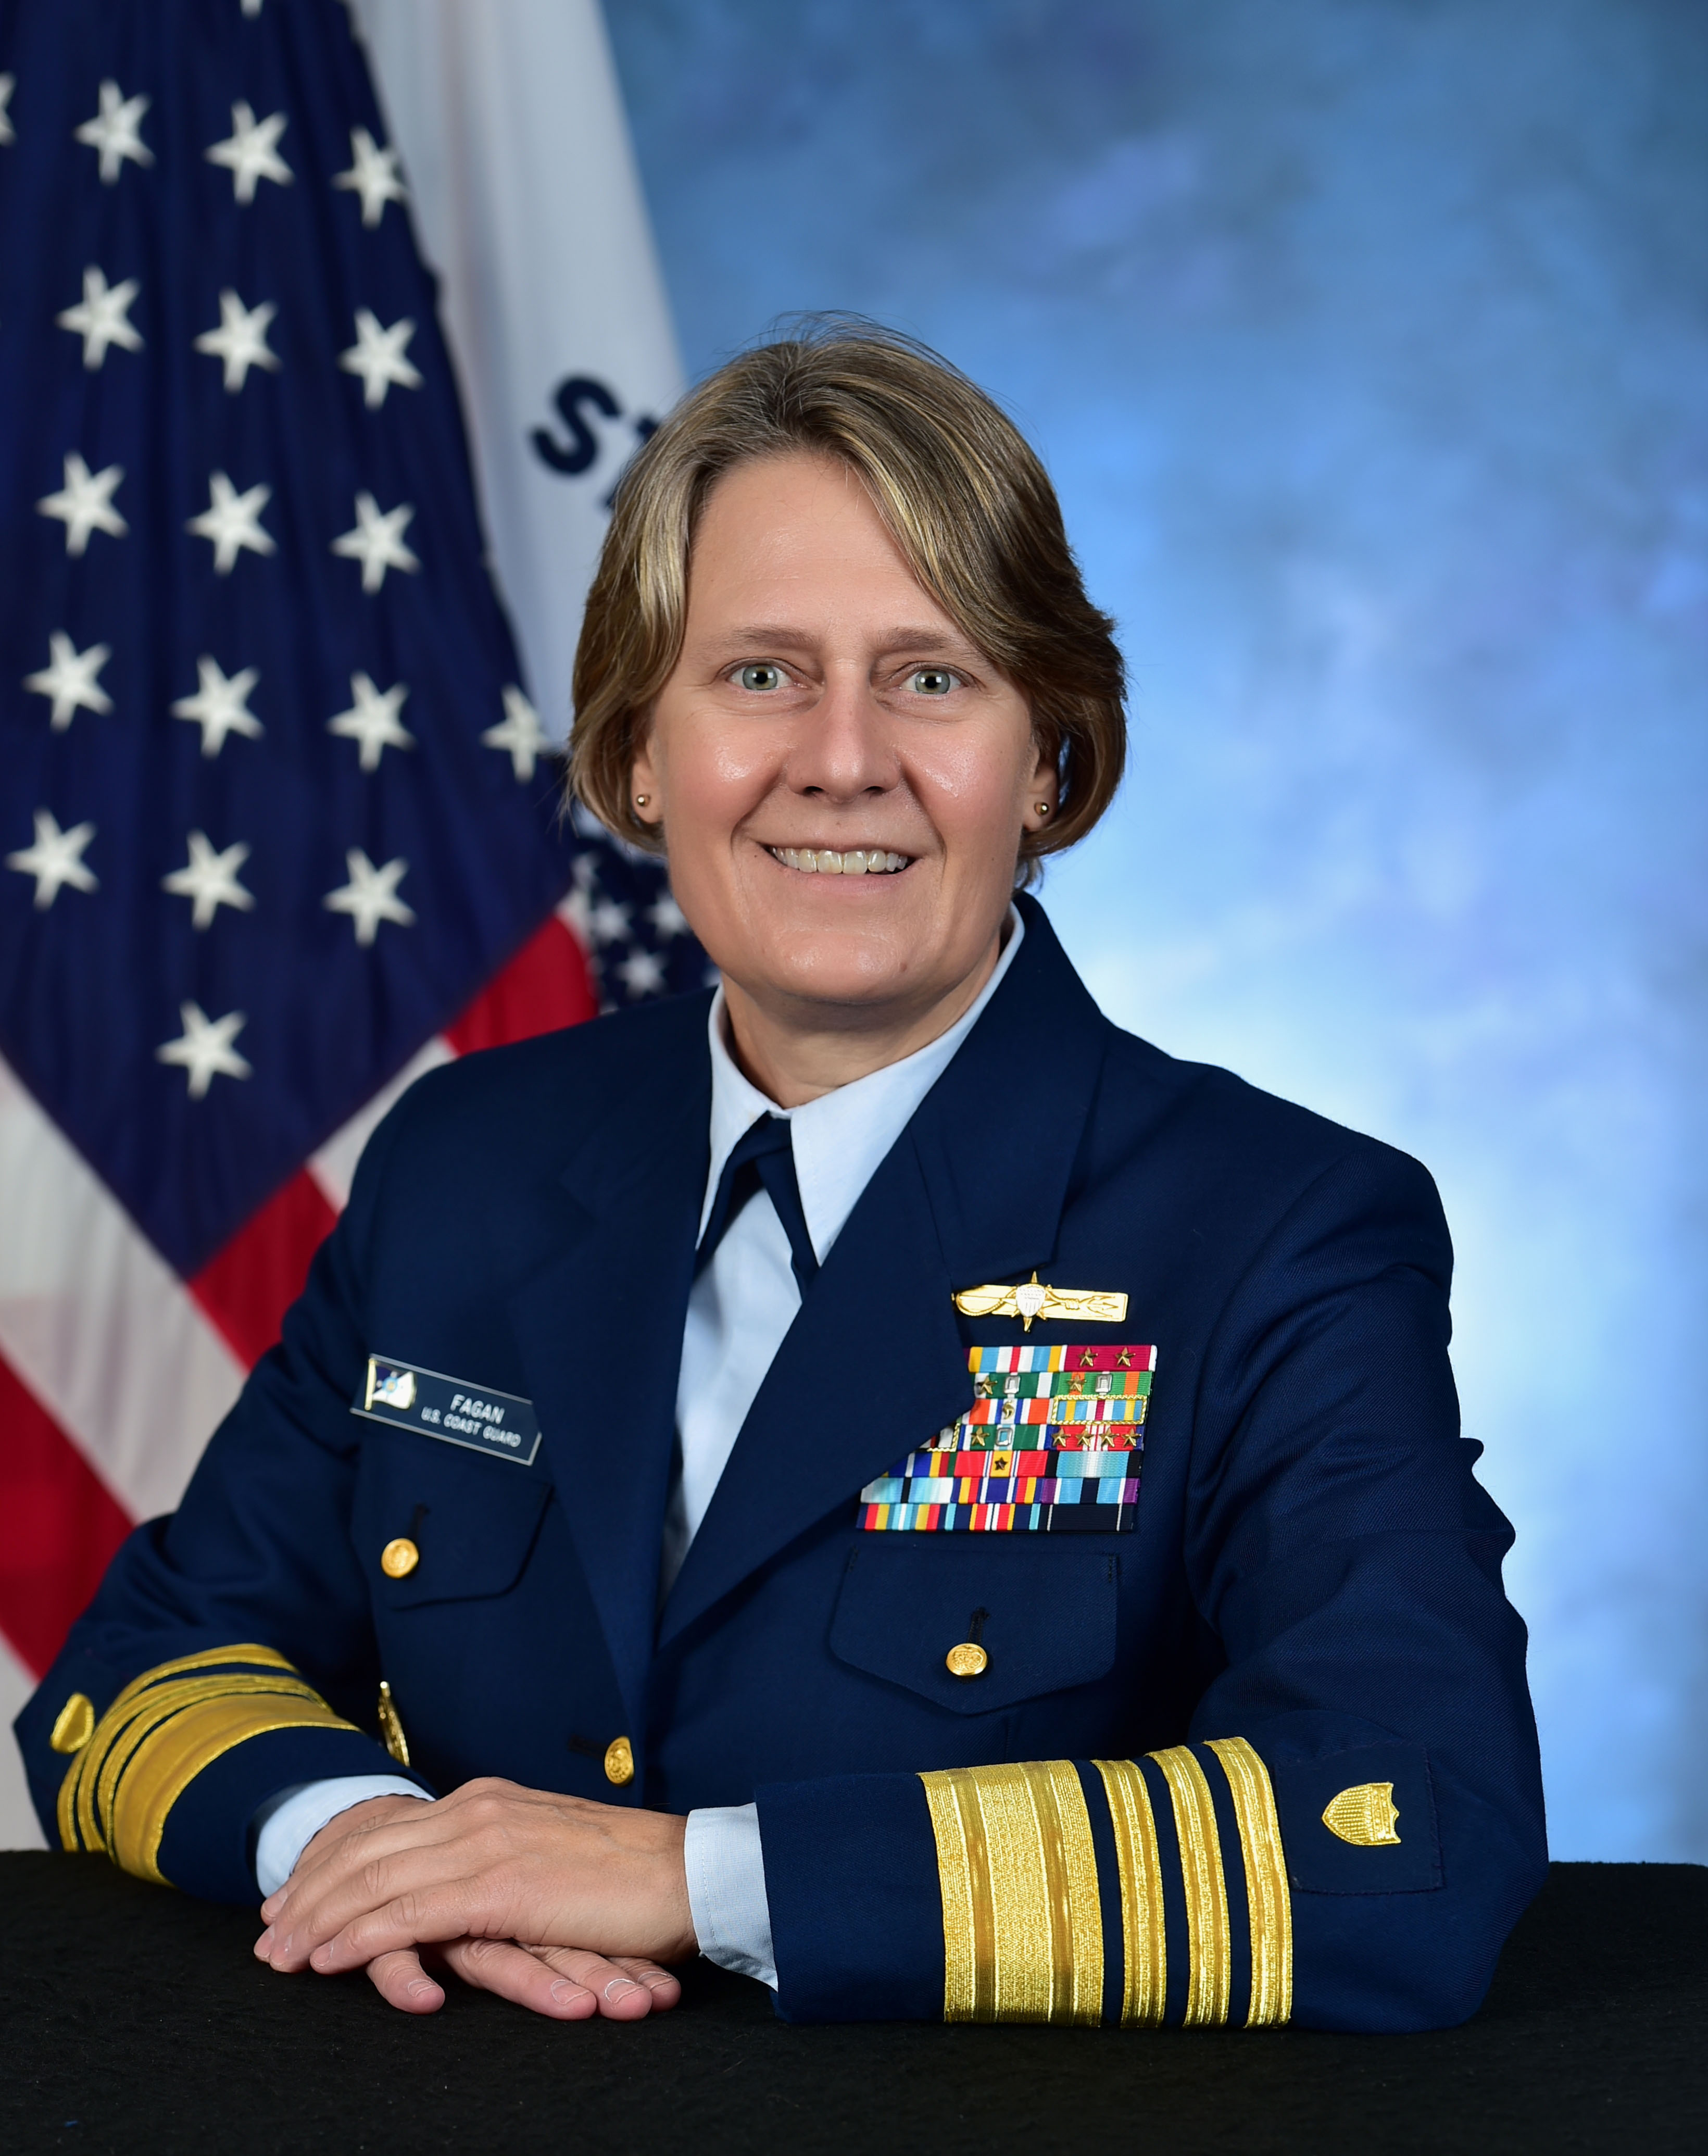 Historic Day for Coast Guard as First Woman Nominated to Serve as Commandant